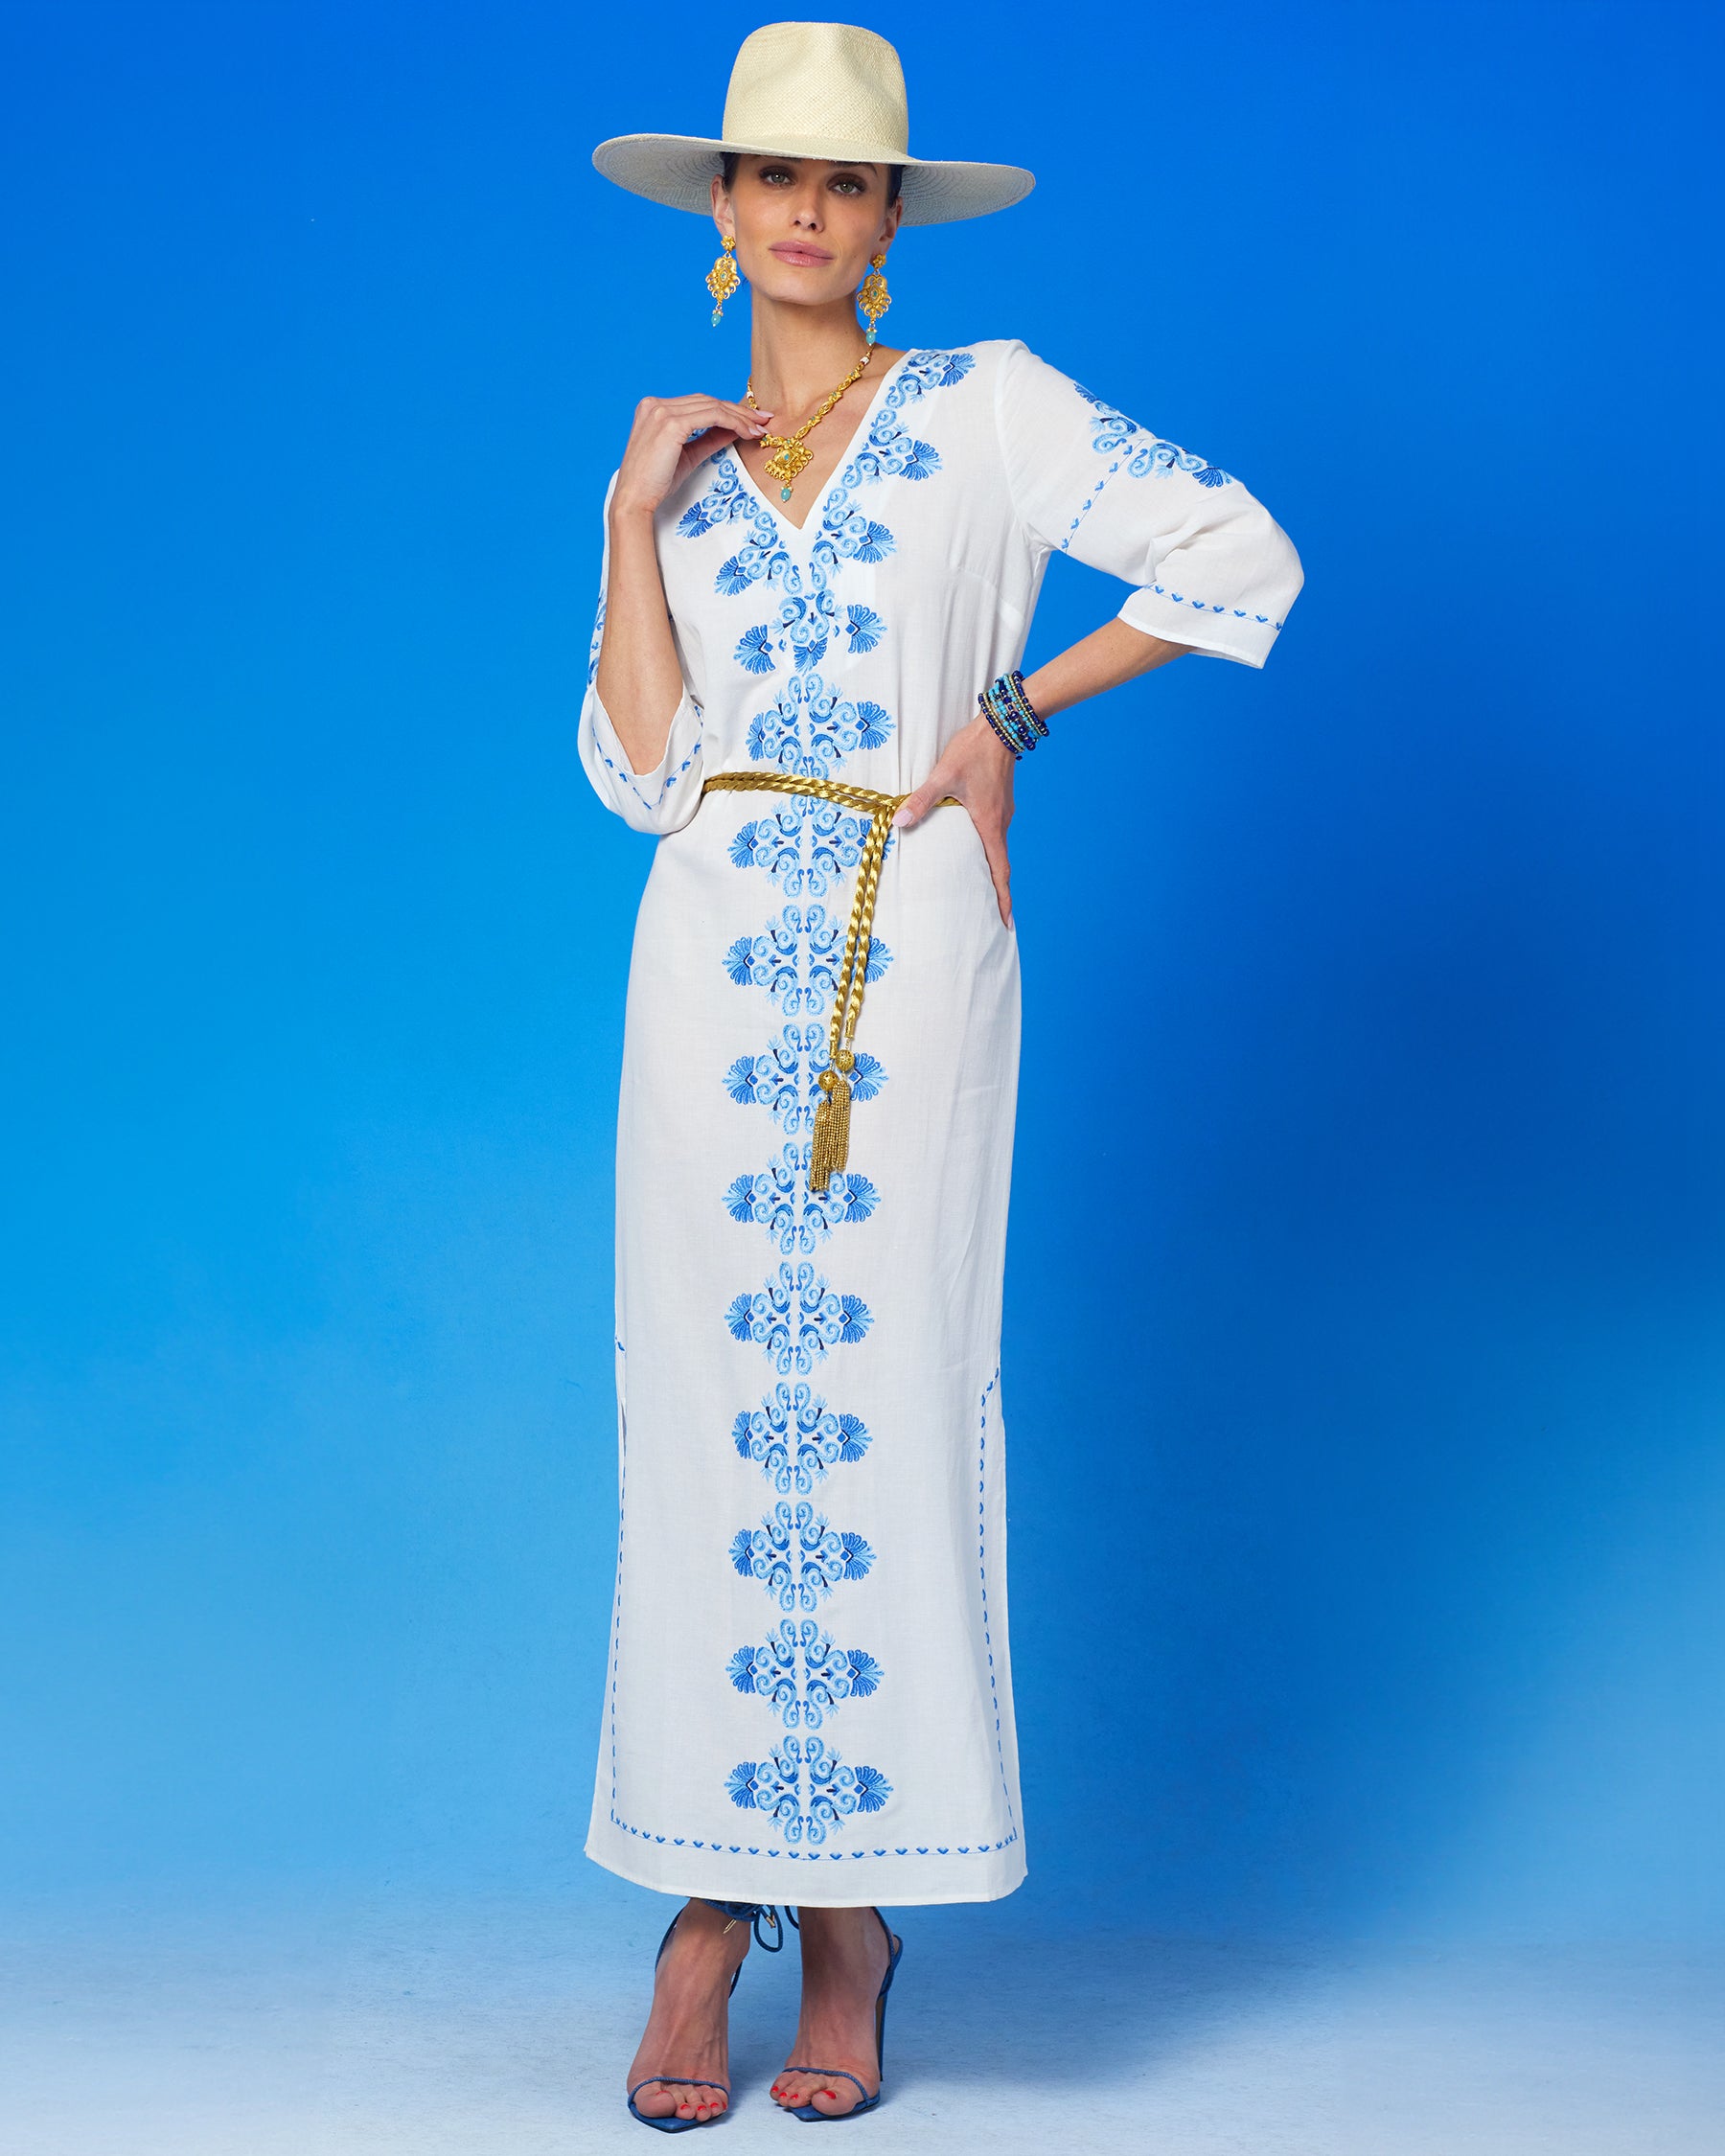 Menorca Long Kaftan Dress and Grecian Motif Embroidery-Front full view with the waist cinched with the Artemis Gold Rope Belt